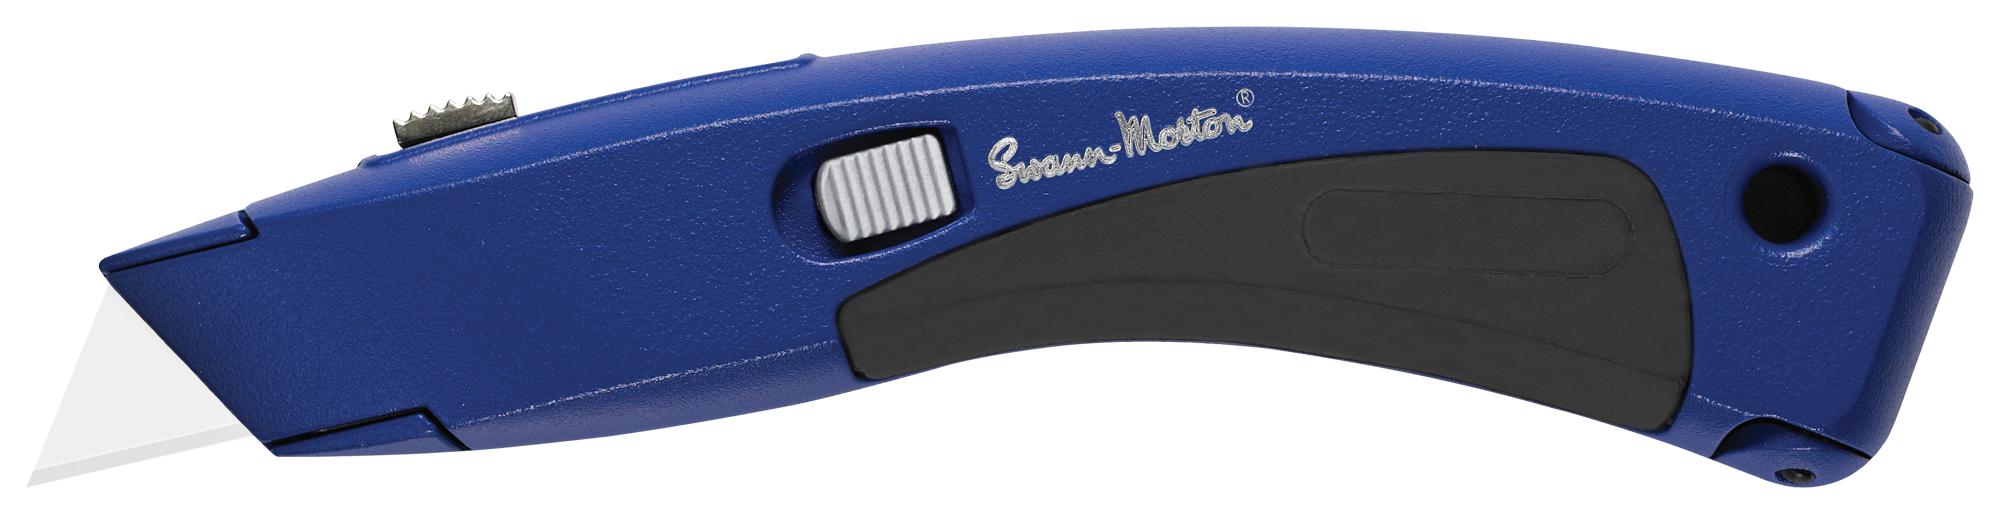 4313 SM INDUSTRIAL TRIMMING KNIFE, WITH 3 BLADE SWANN-MORTON